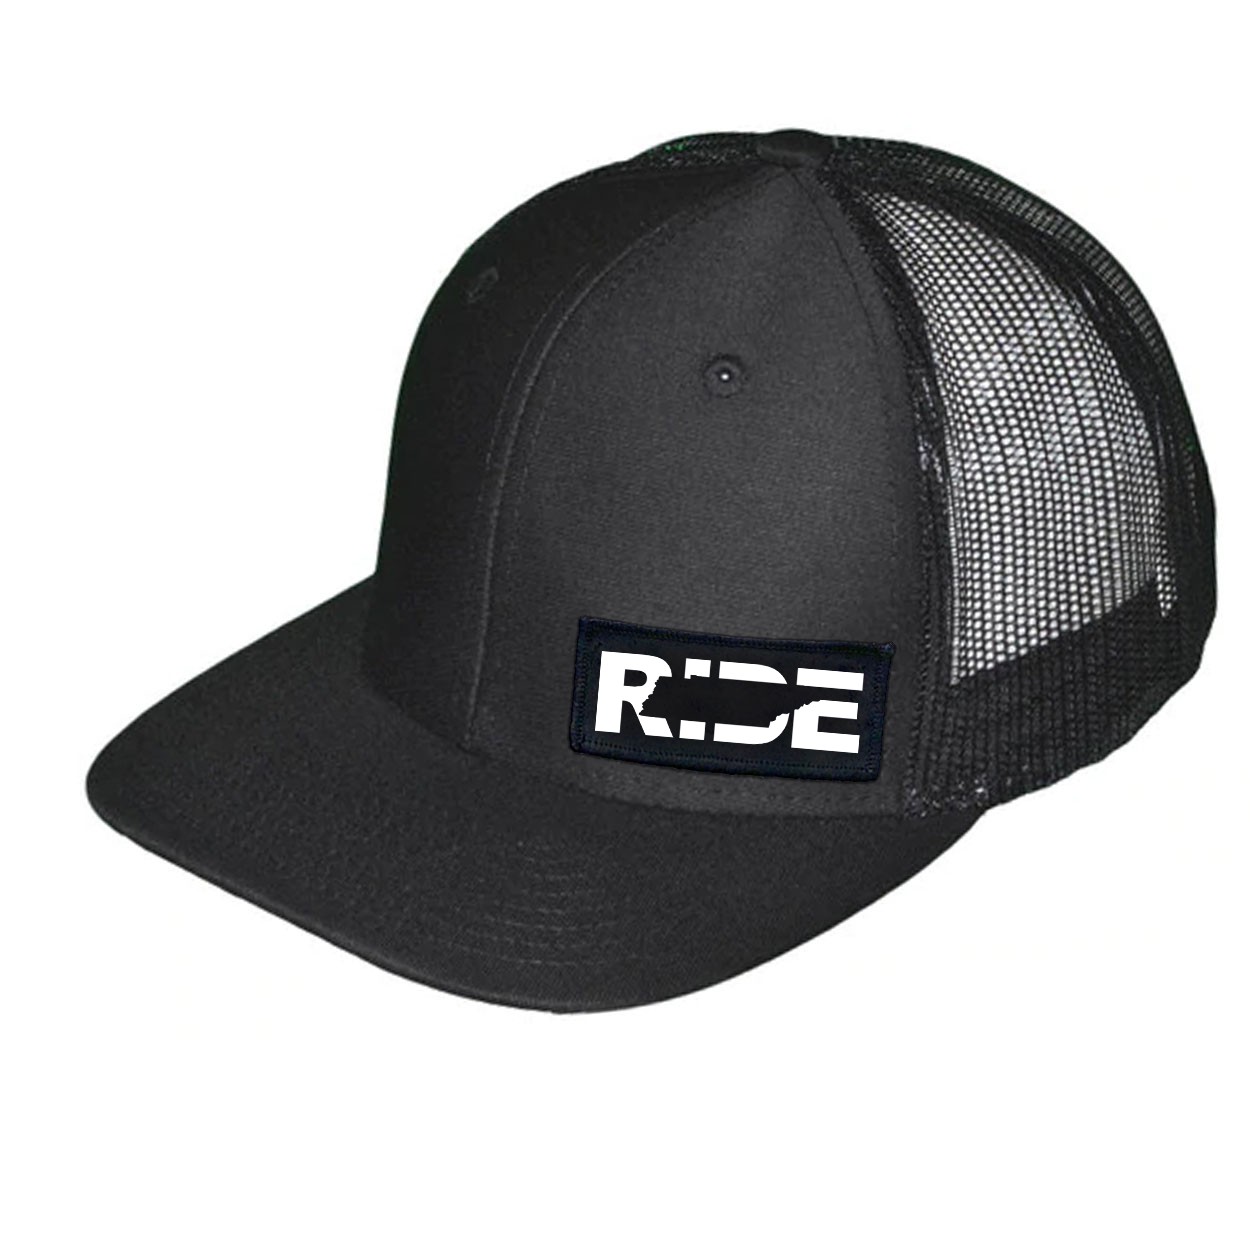 Ride Tennessee Night Out Woven Patch Snapback Trucker Hat Black (White Logo)